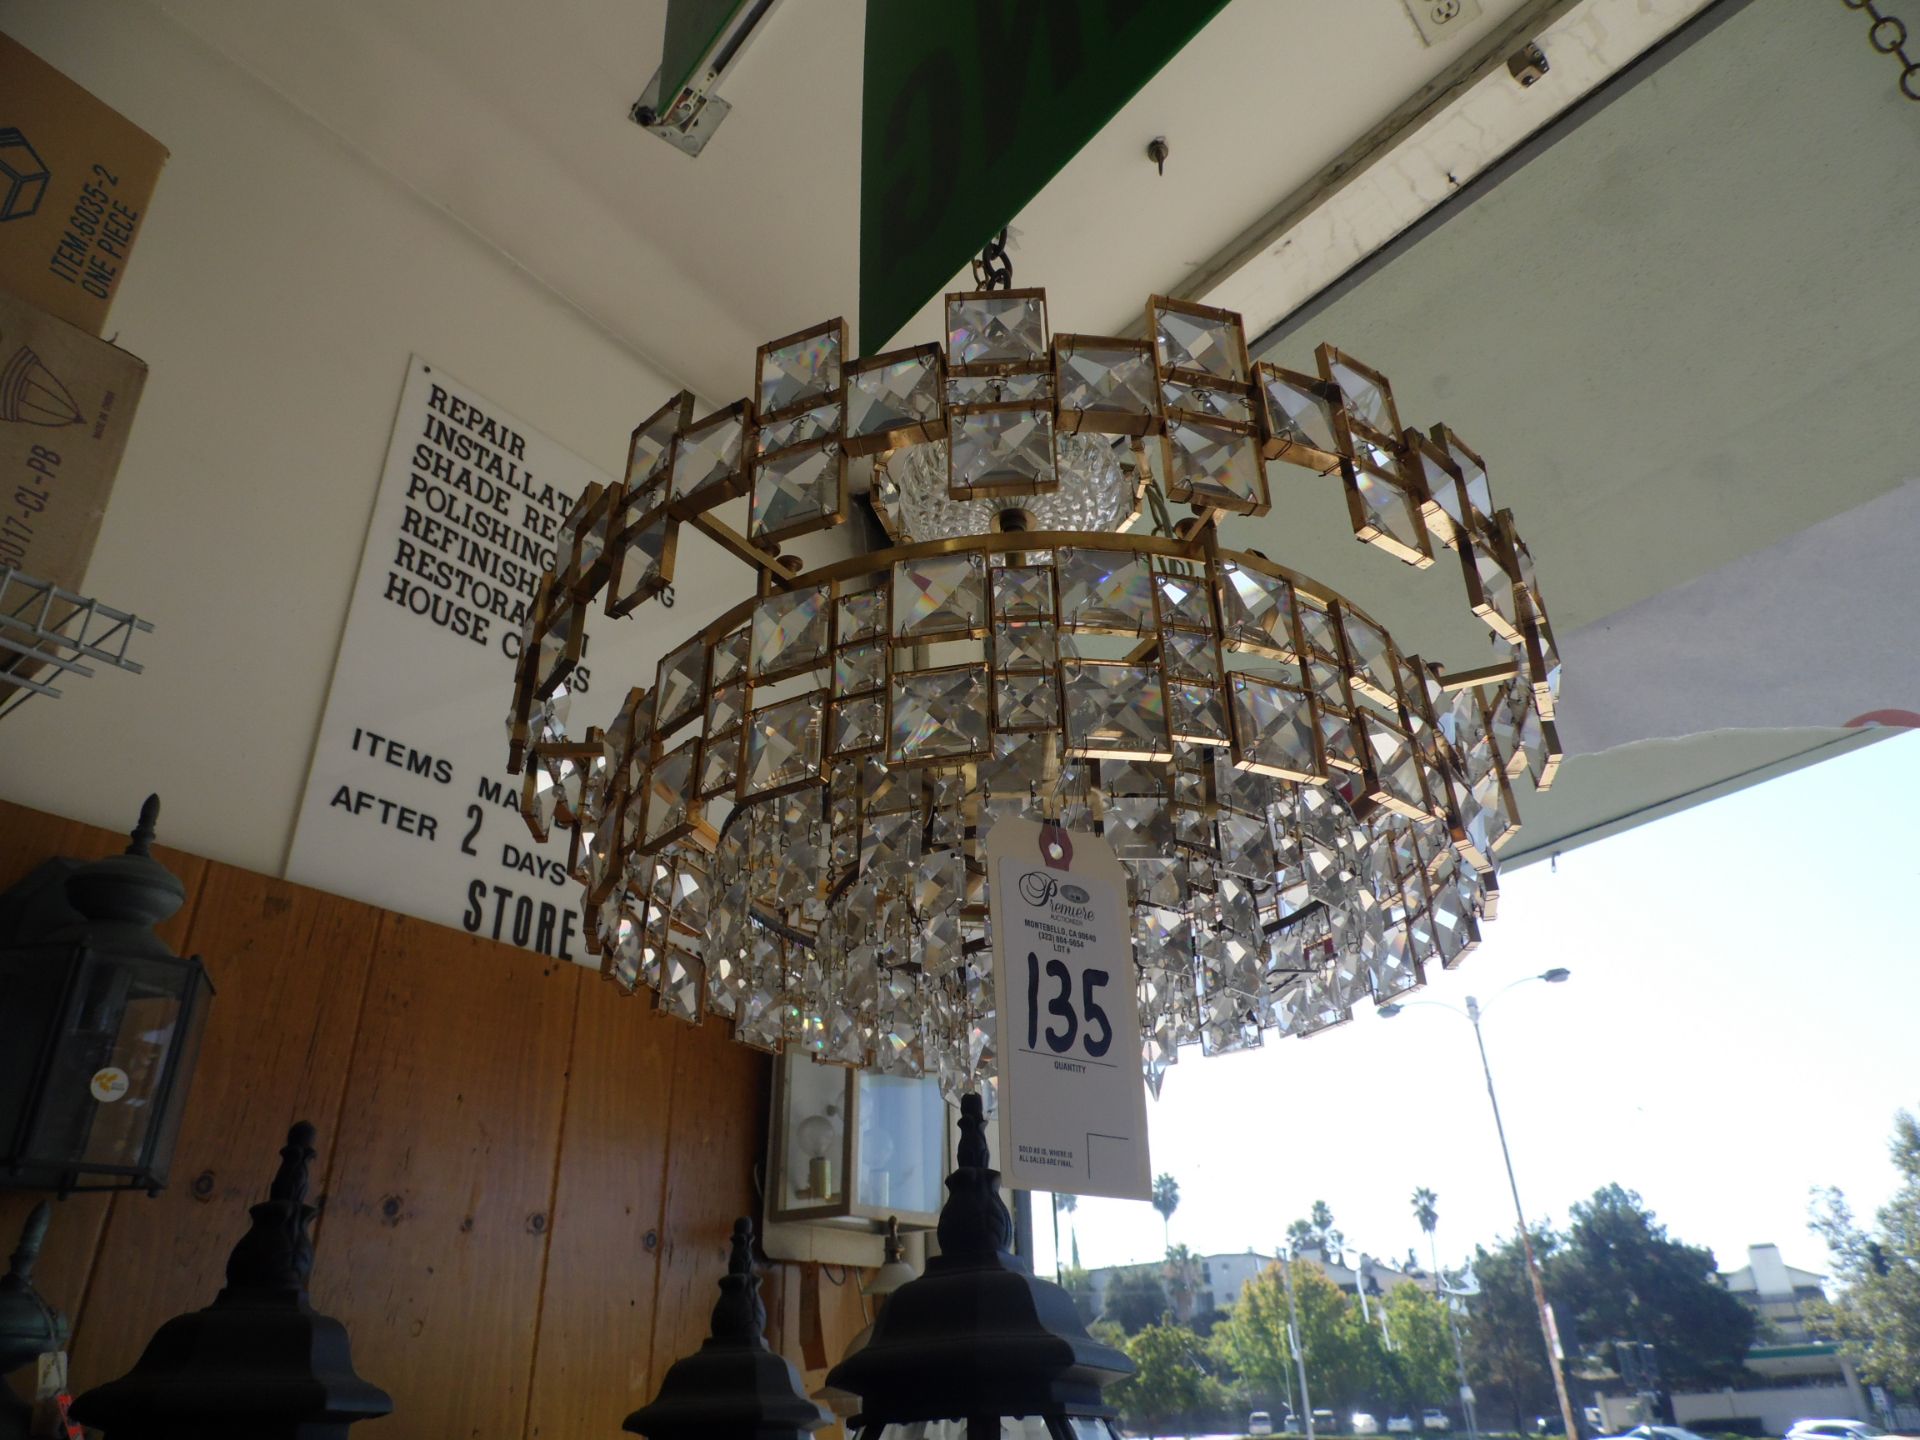 HANGING CHANDELIER w/ PRISMS ON CEILING